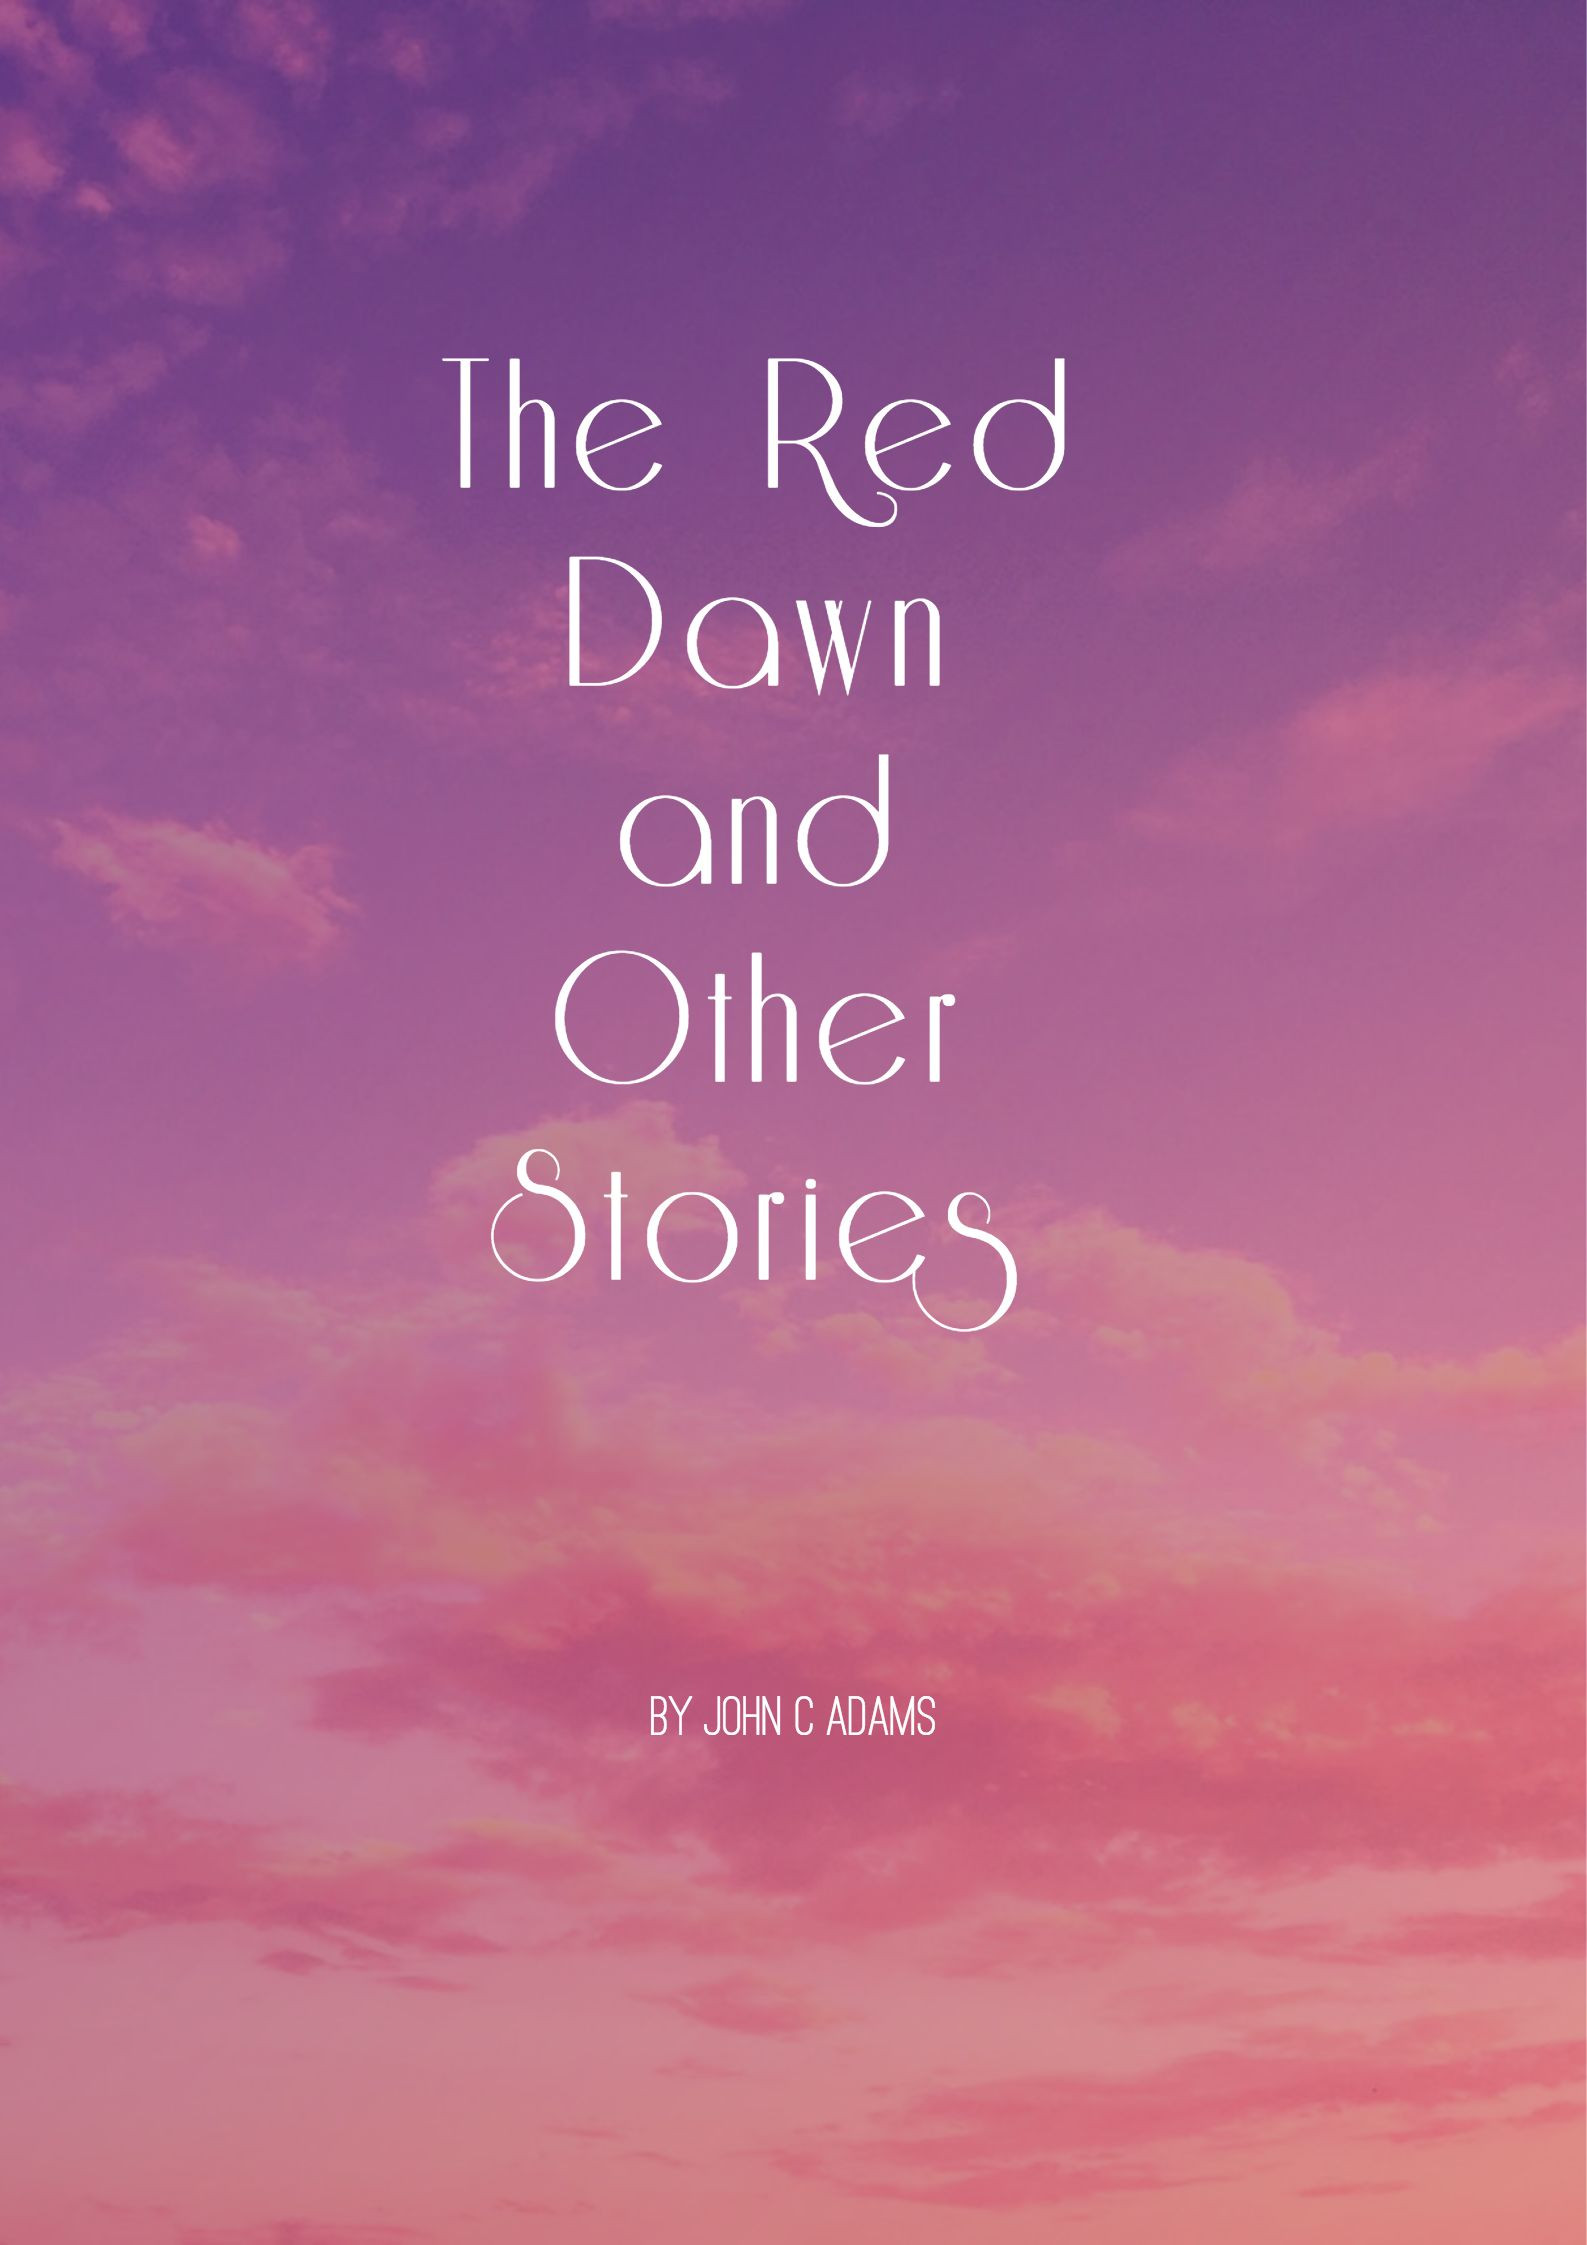 The Red Dawn And Other Stories